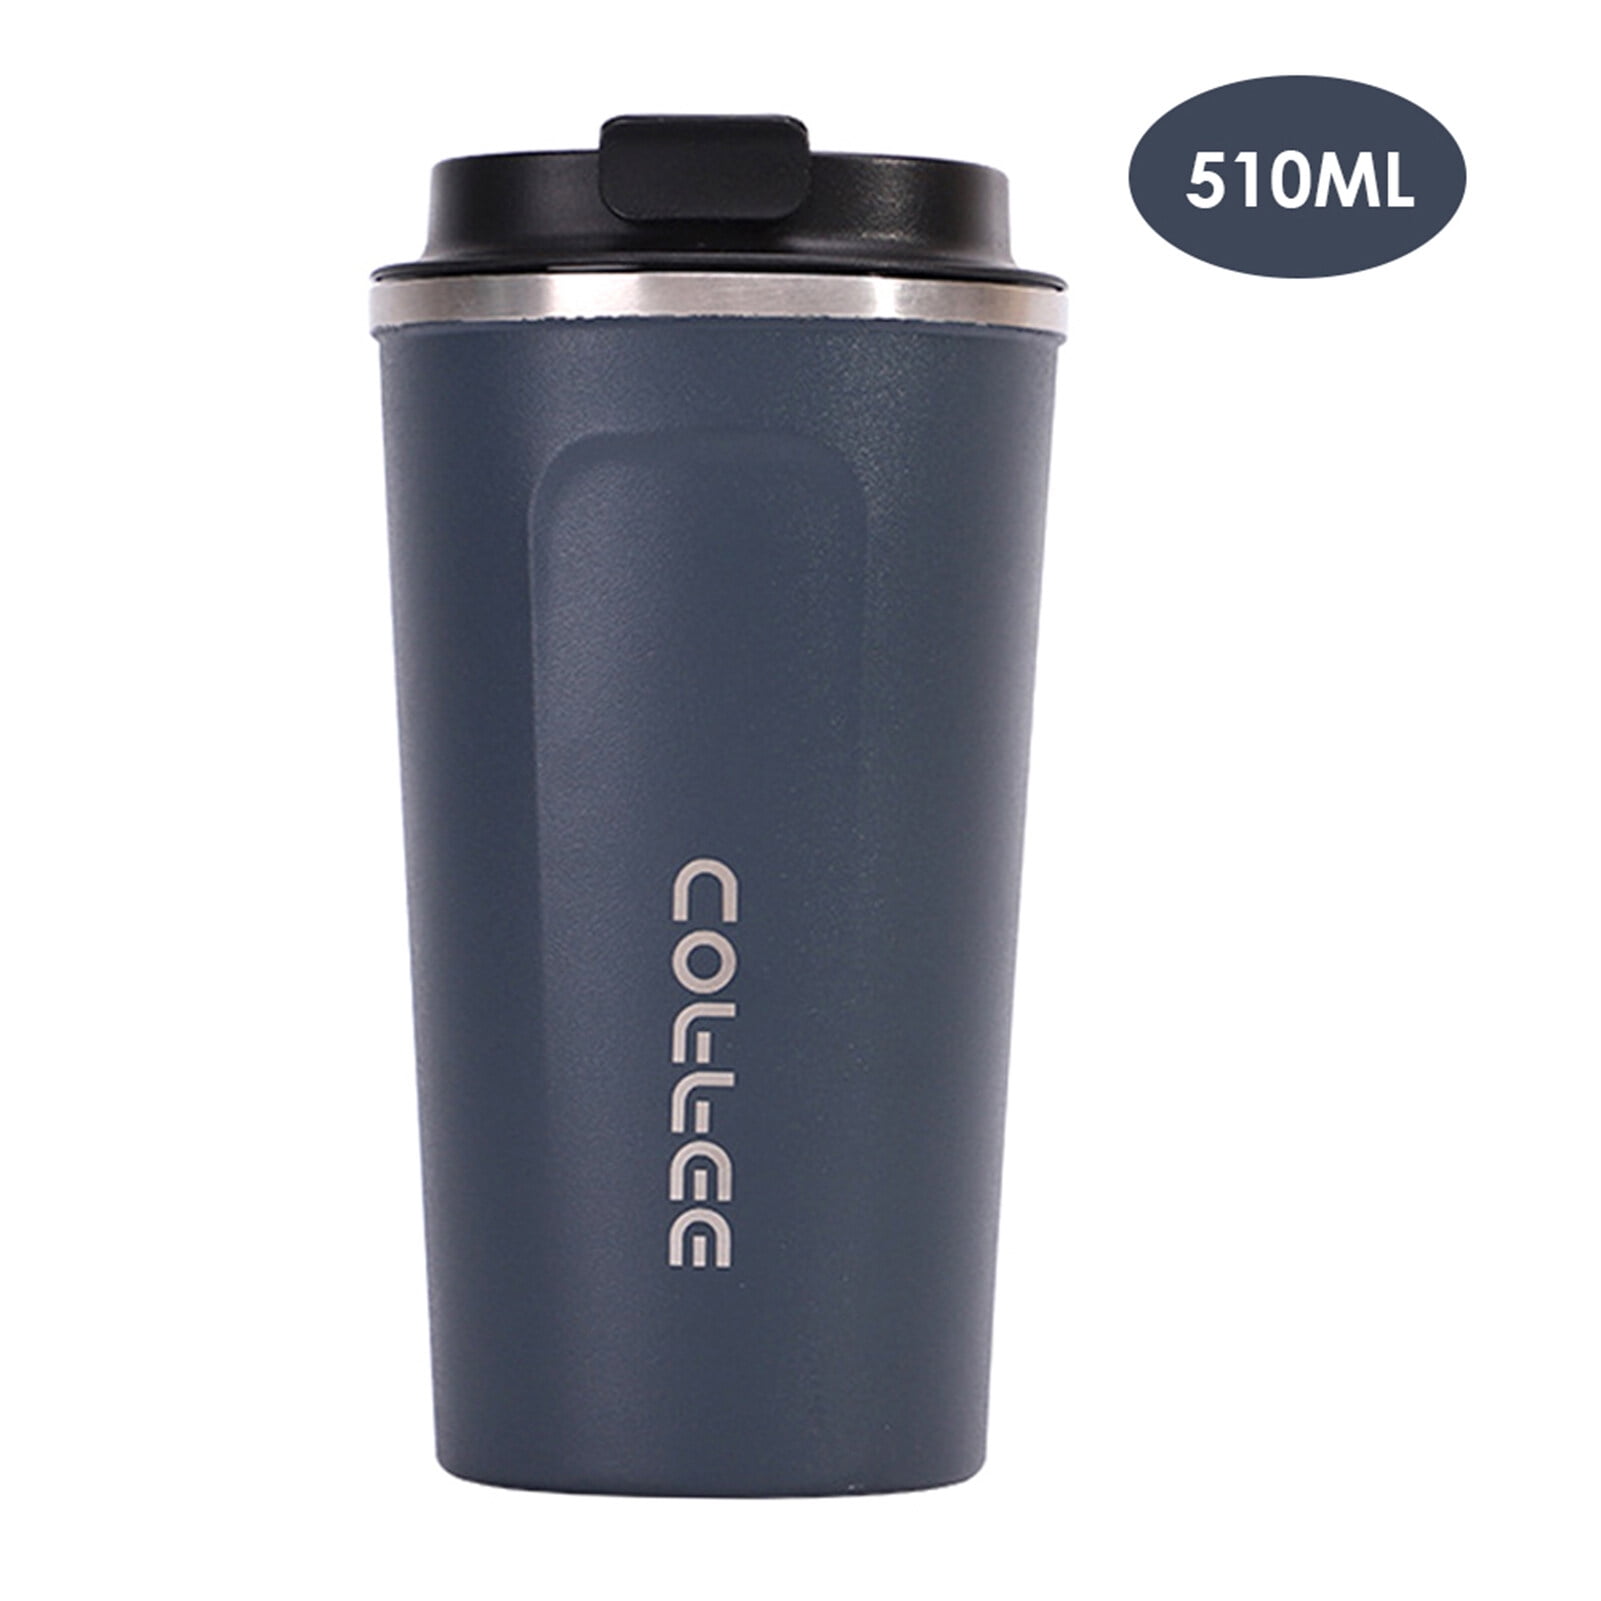 VUSIGN 510ML Stainless Steel Car Coffee Cup Leakproof Insulated Thermal  Thermos Cup Car Portable Travel Coffee Mug,White